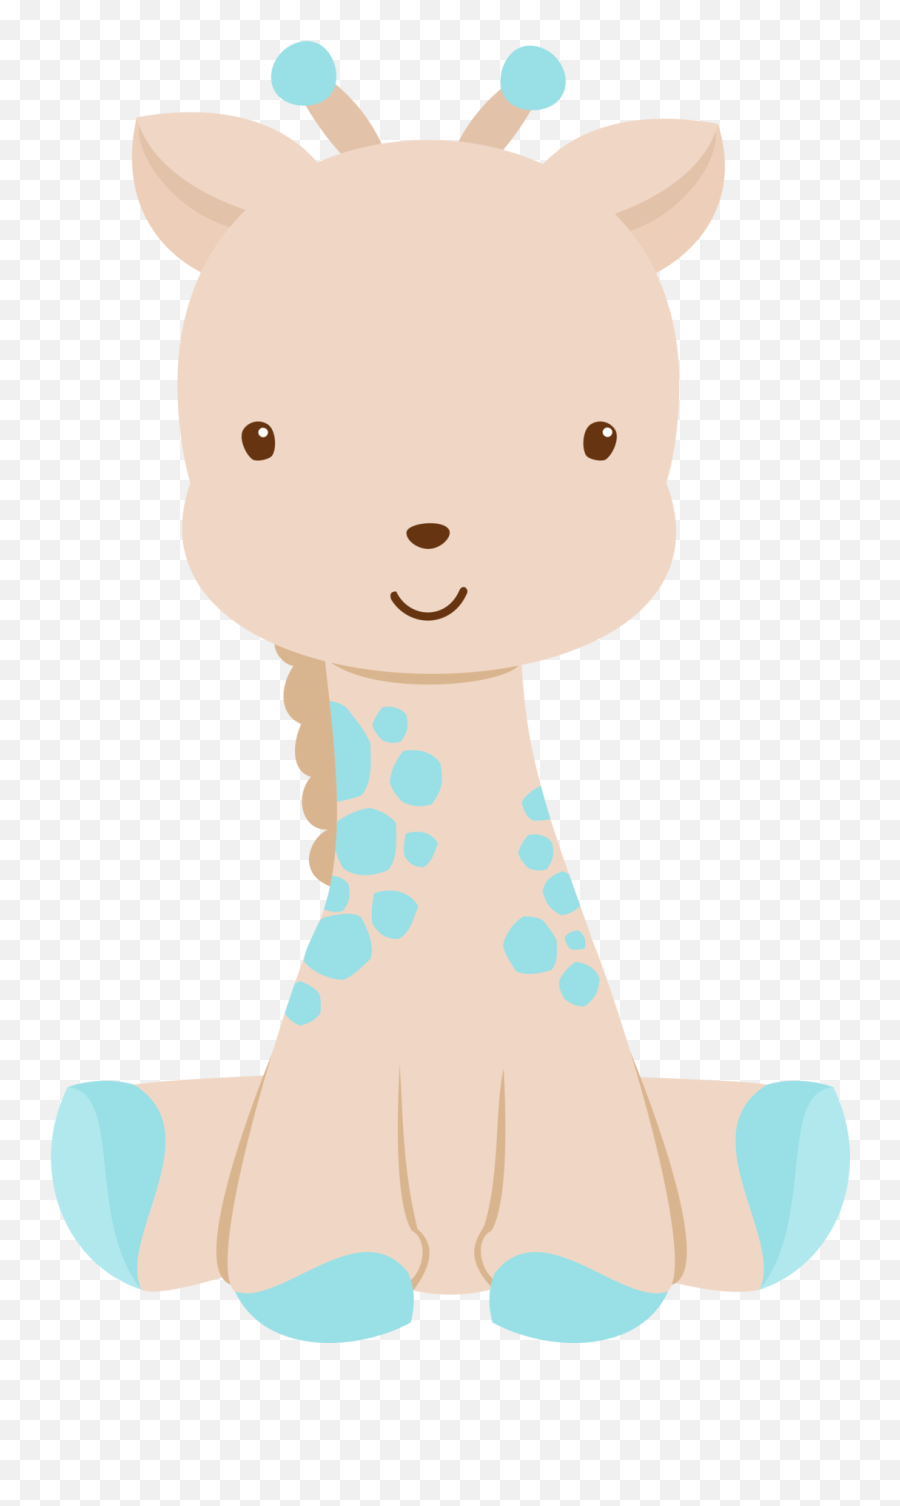 View All Images At Png Folder Baby Clip Art Baby Quilts - Baby Shower Baby Animals Png Emoji,Giraffe Emoji Android